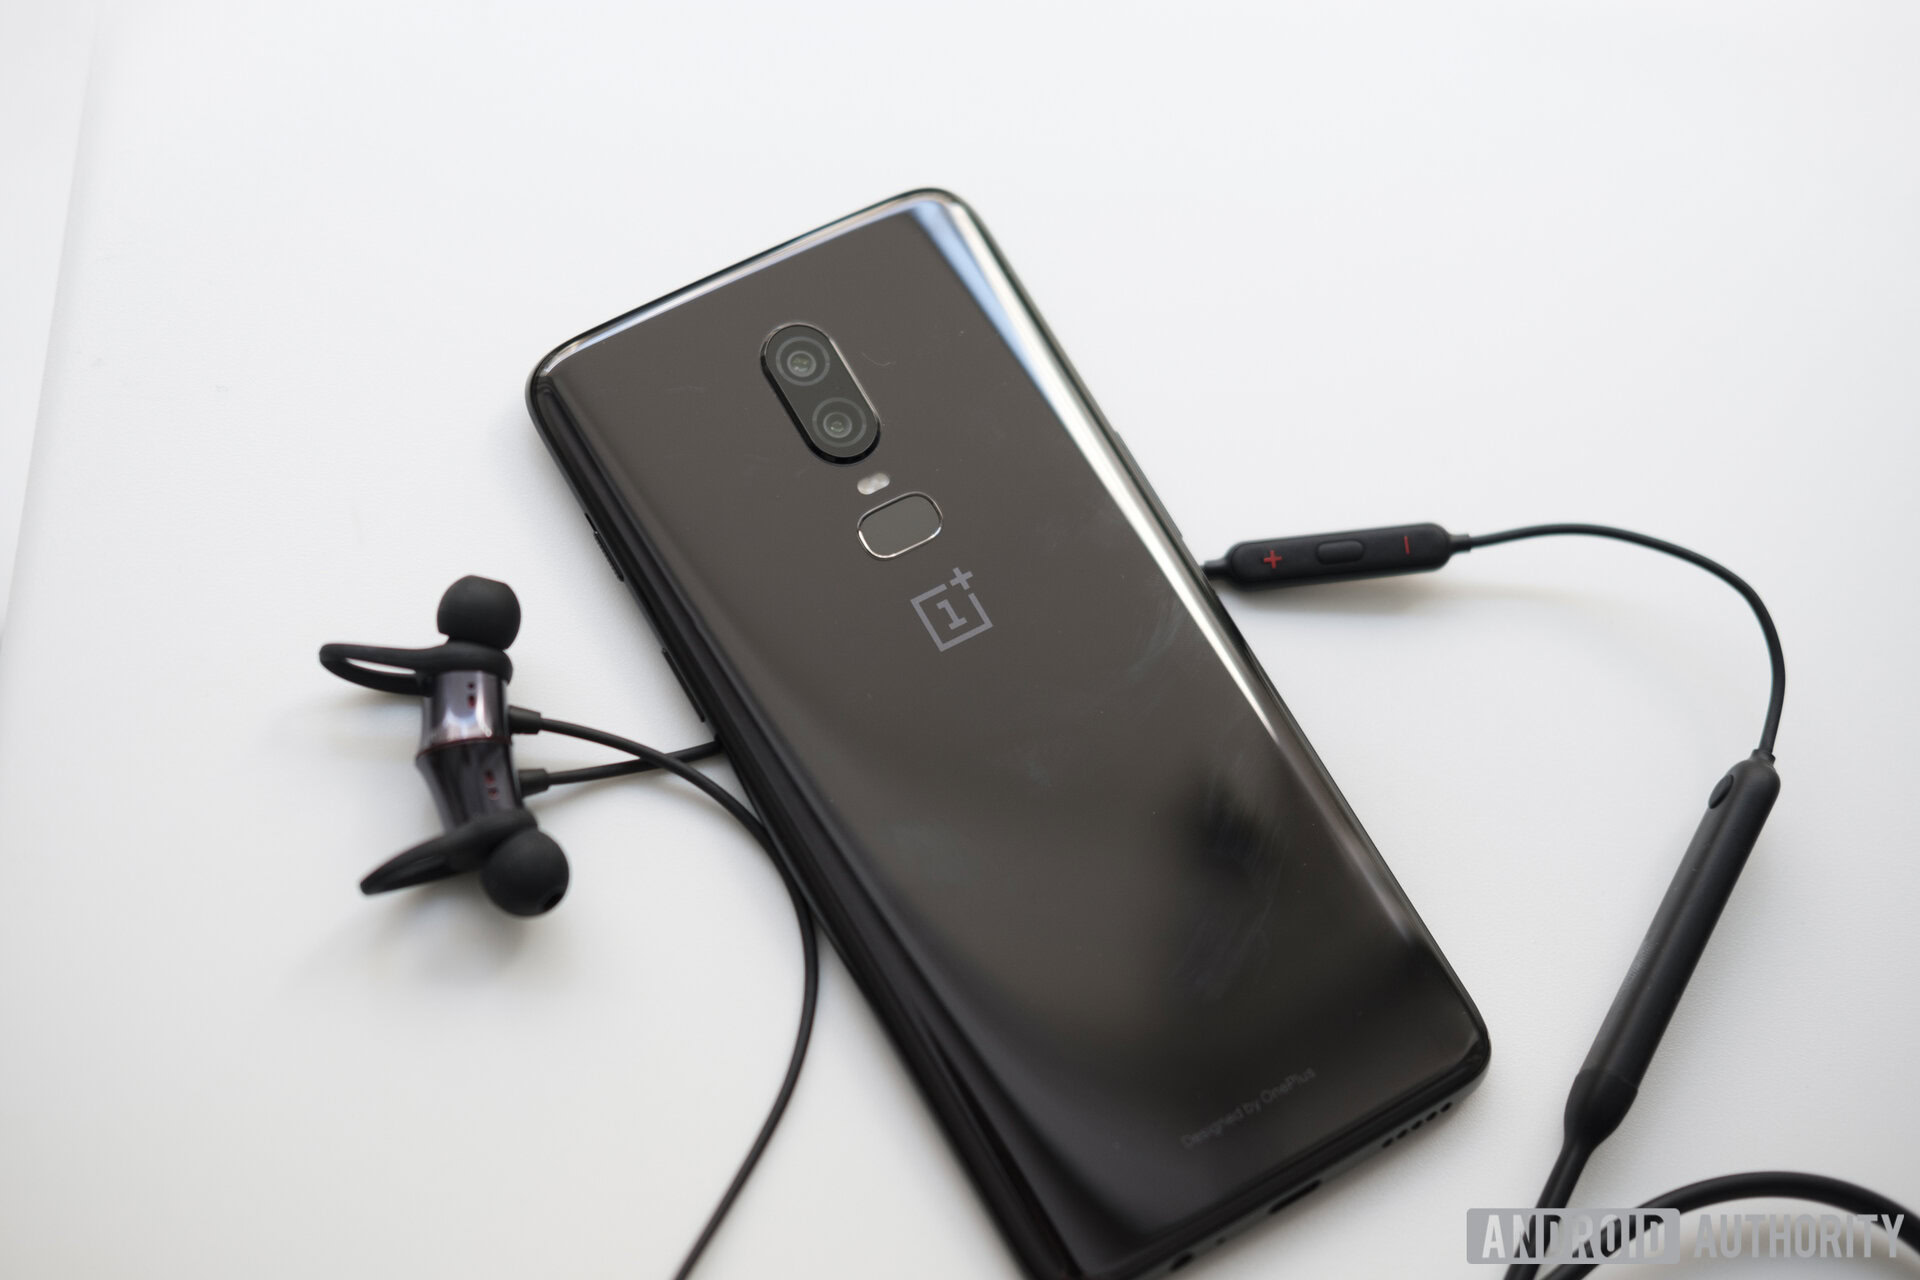 OnePlus Bullets Wireless: Official price, release date, and features2160 x 1440